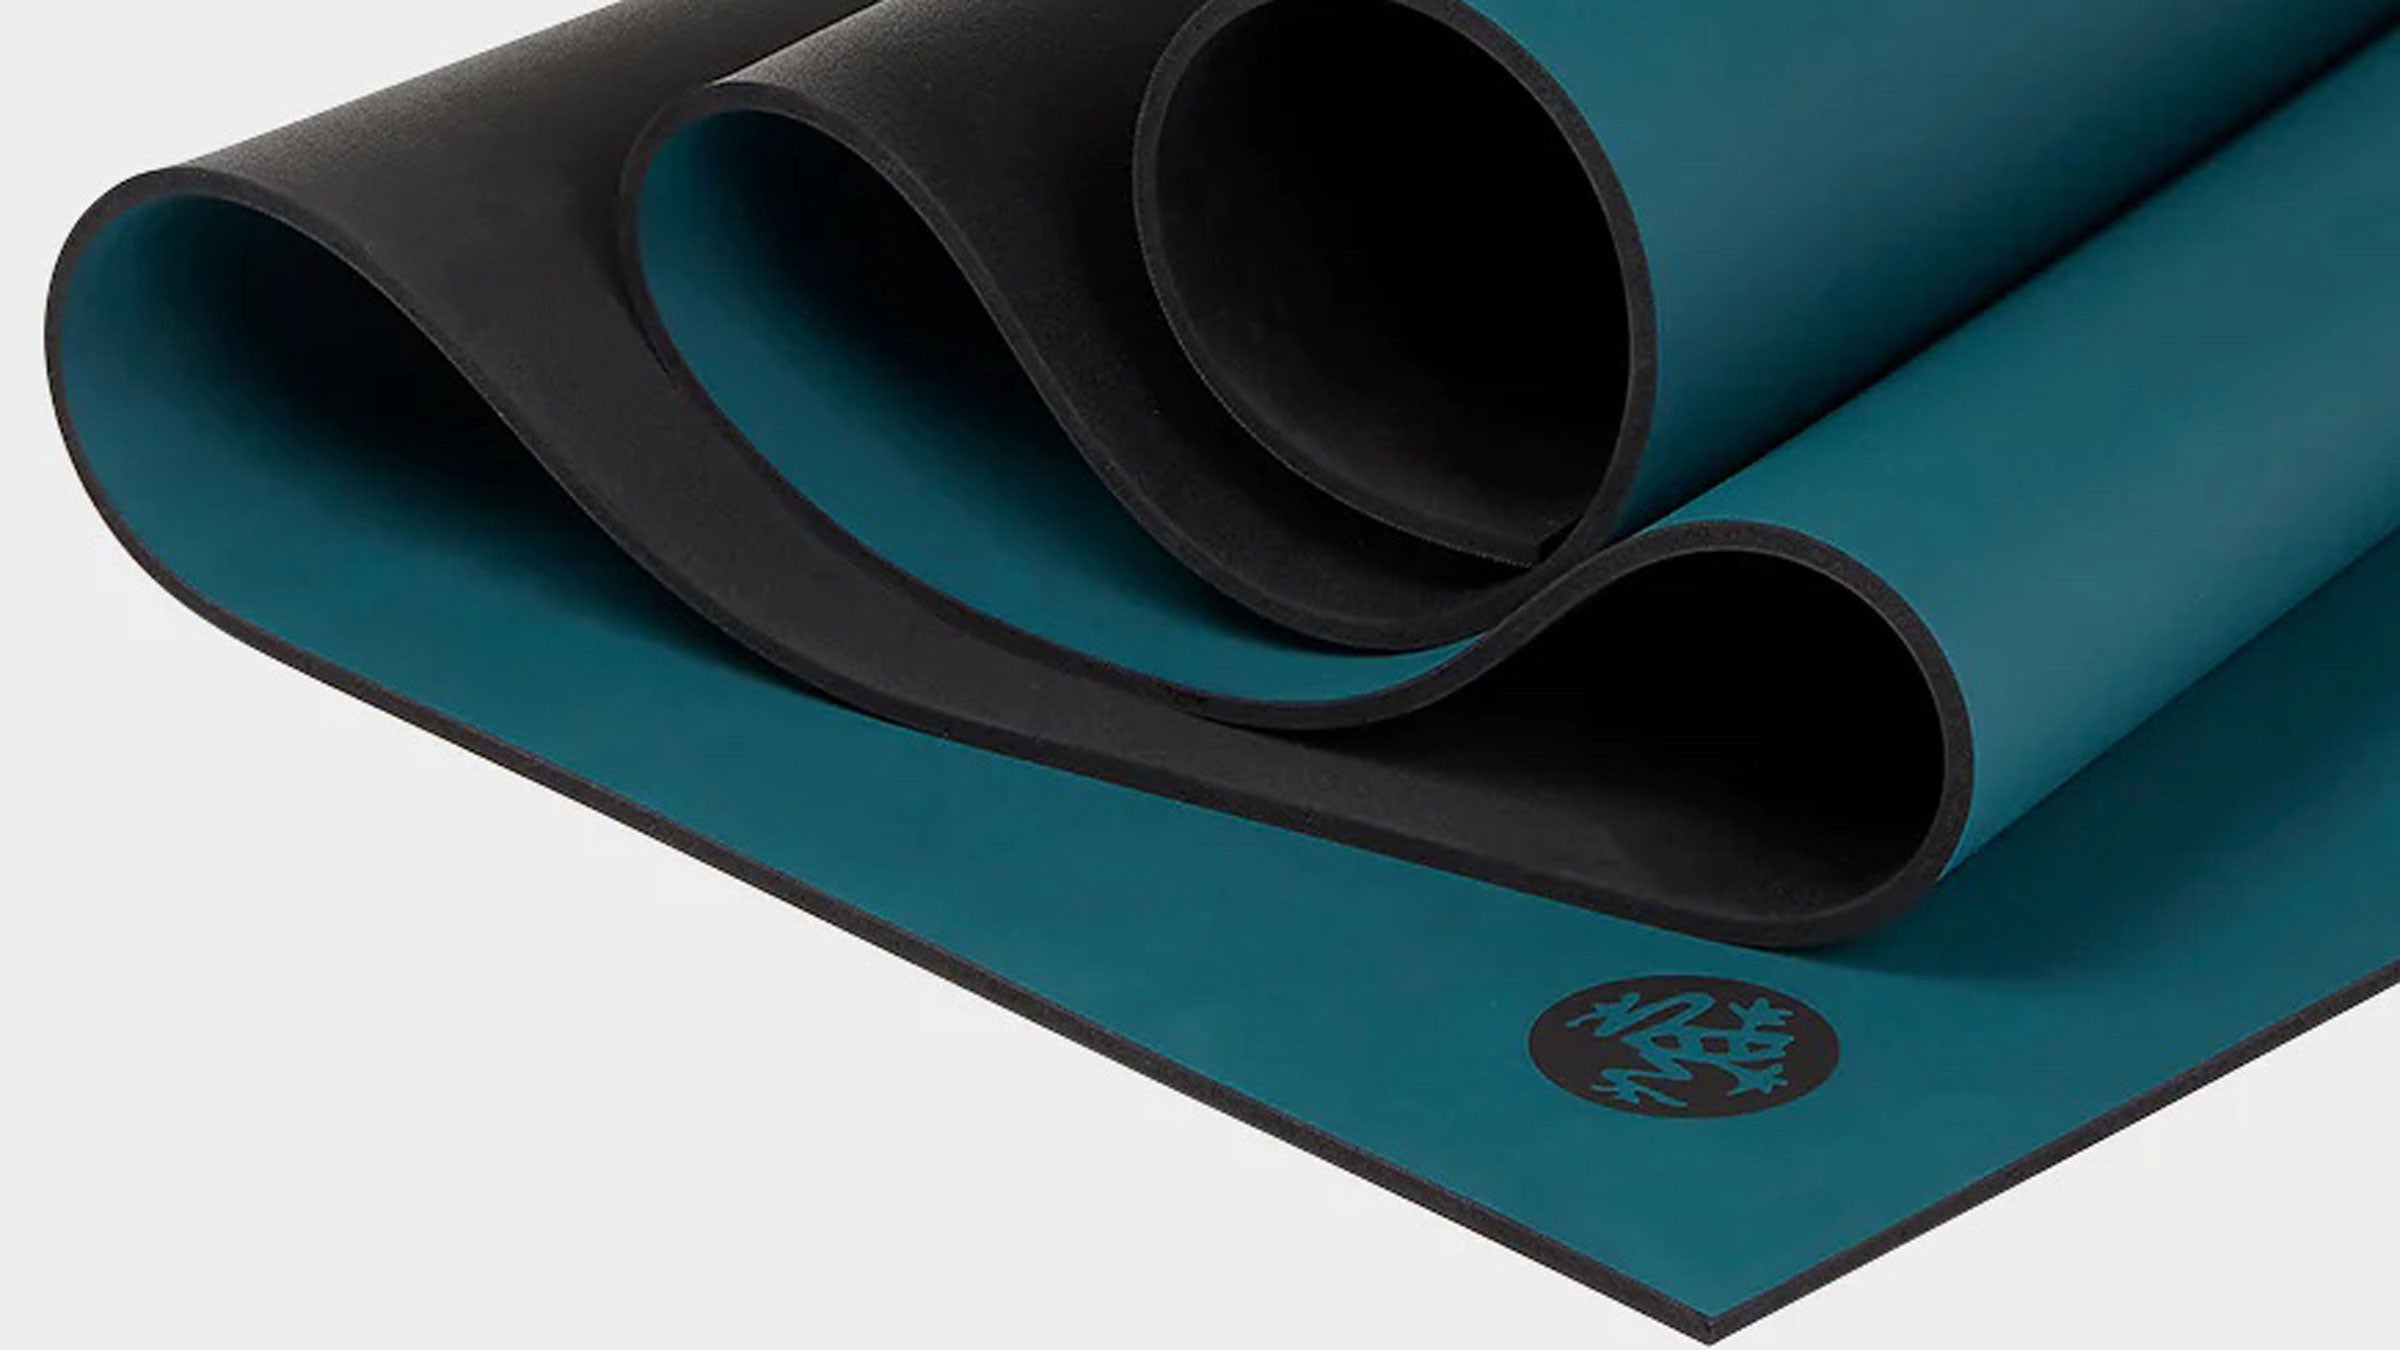 Yoga Gifts Ideas  Find that special gift for the yoga